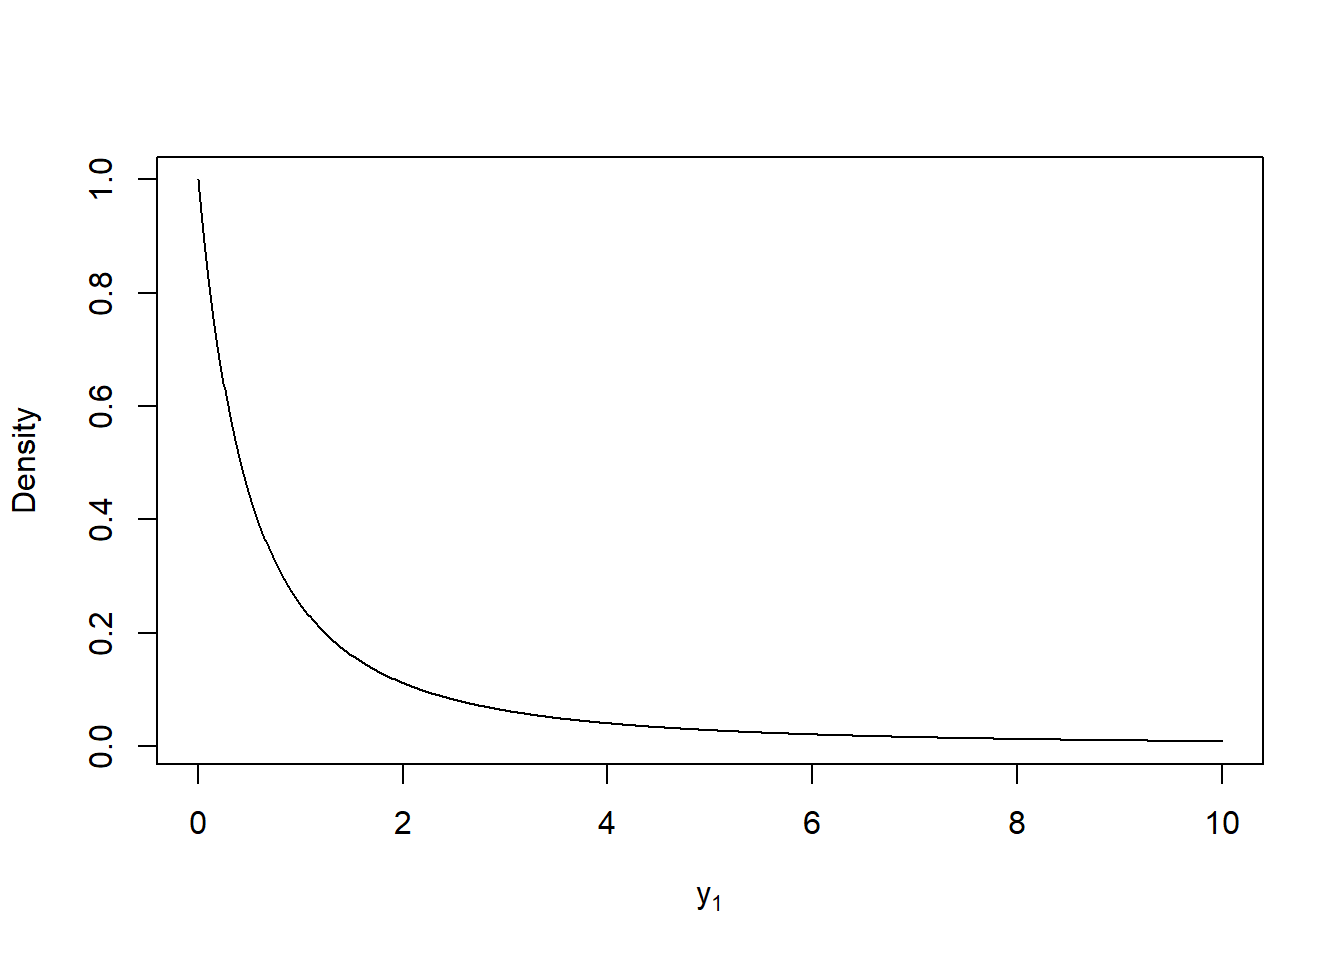 Plot of the p.d.f. of $Y_1$.